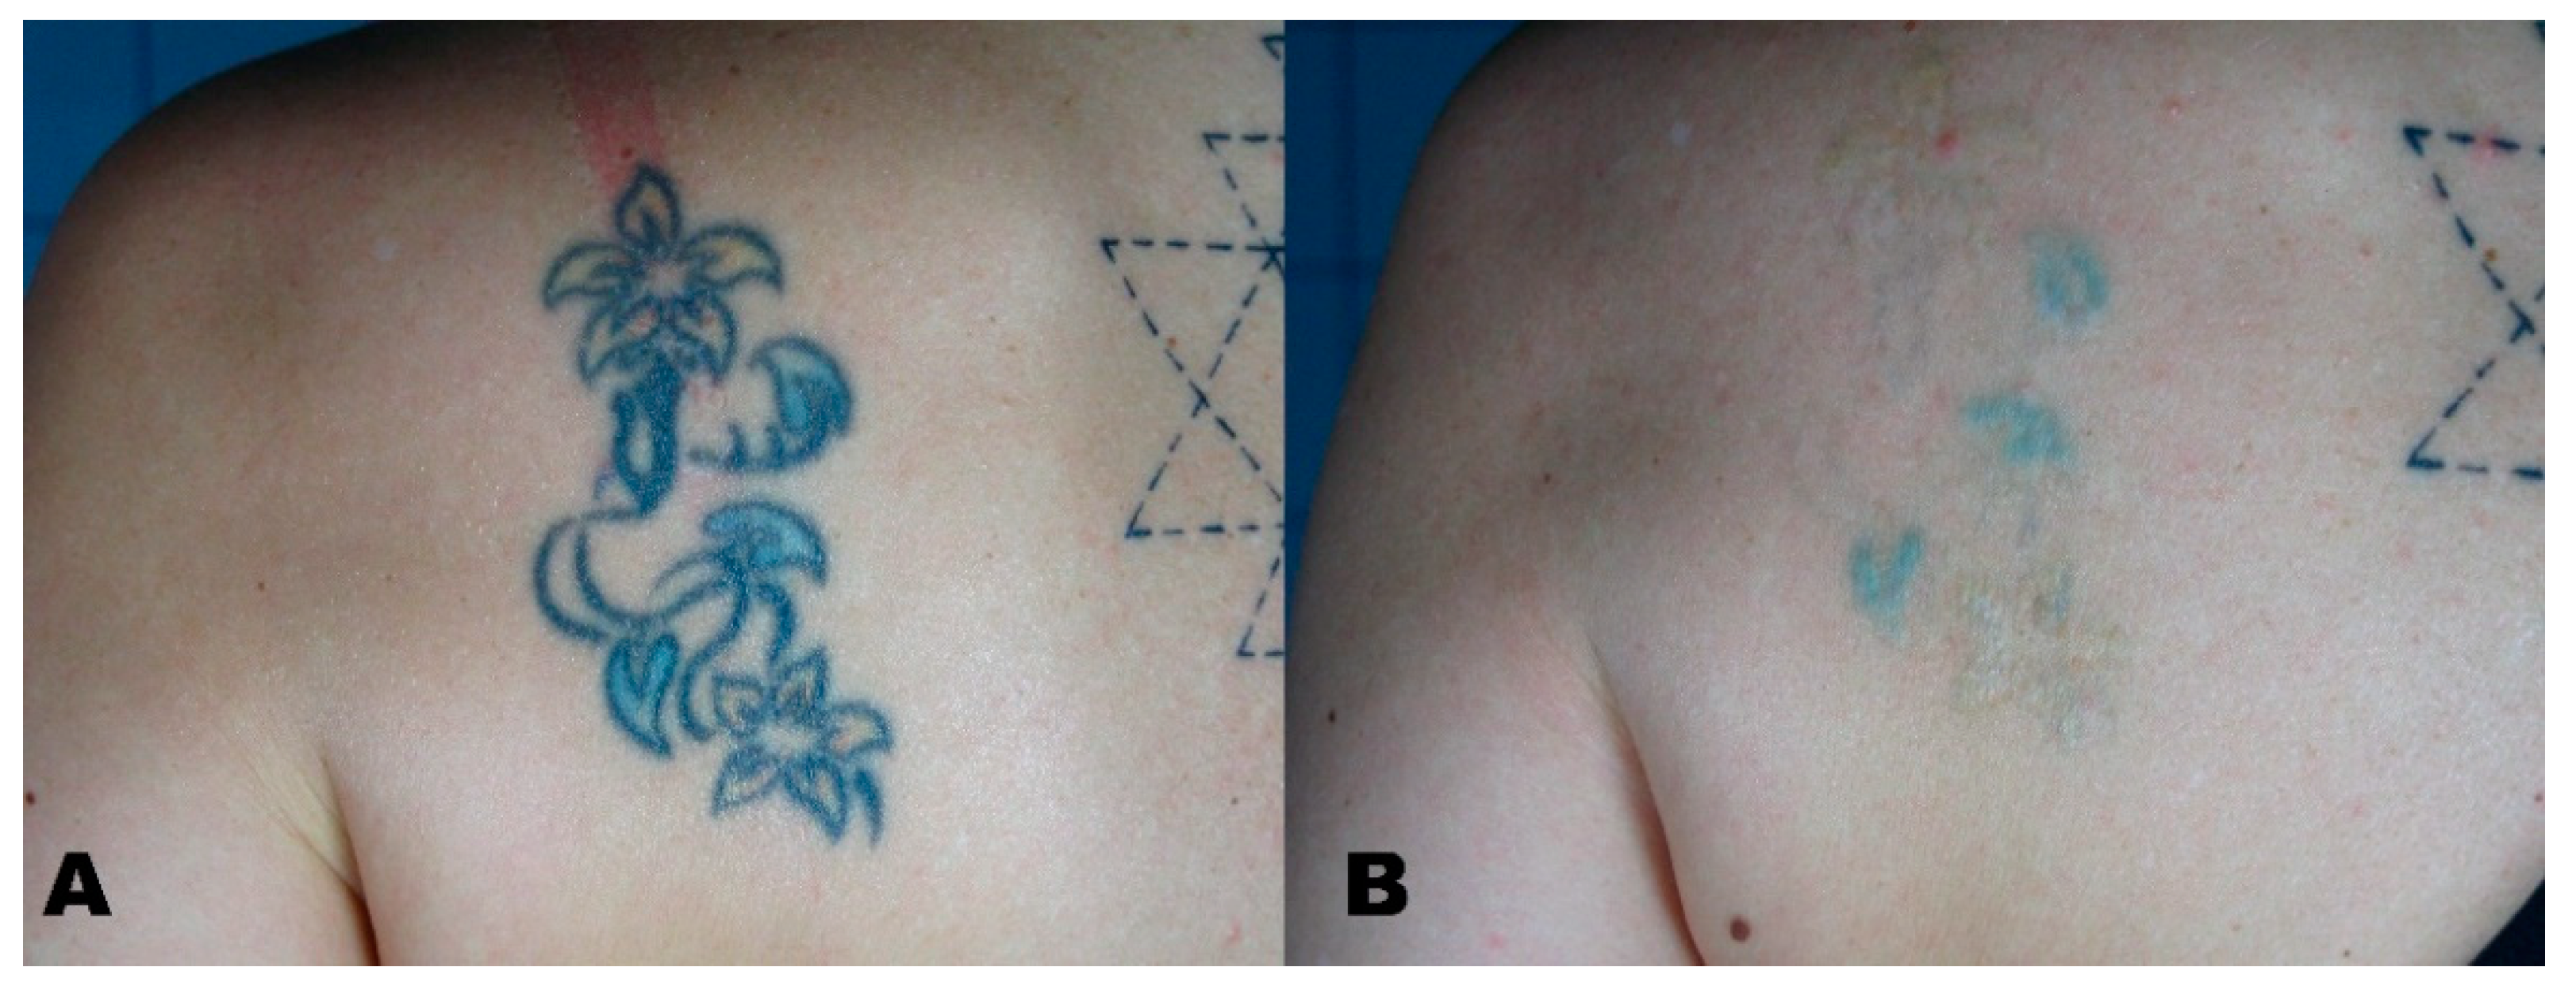 Get Permanent Tattoo Removed Right Away  By Dr Shruti Kohli  Lybrate